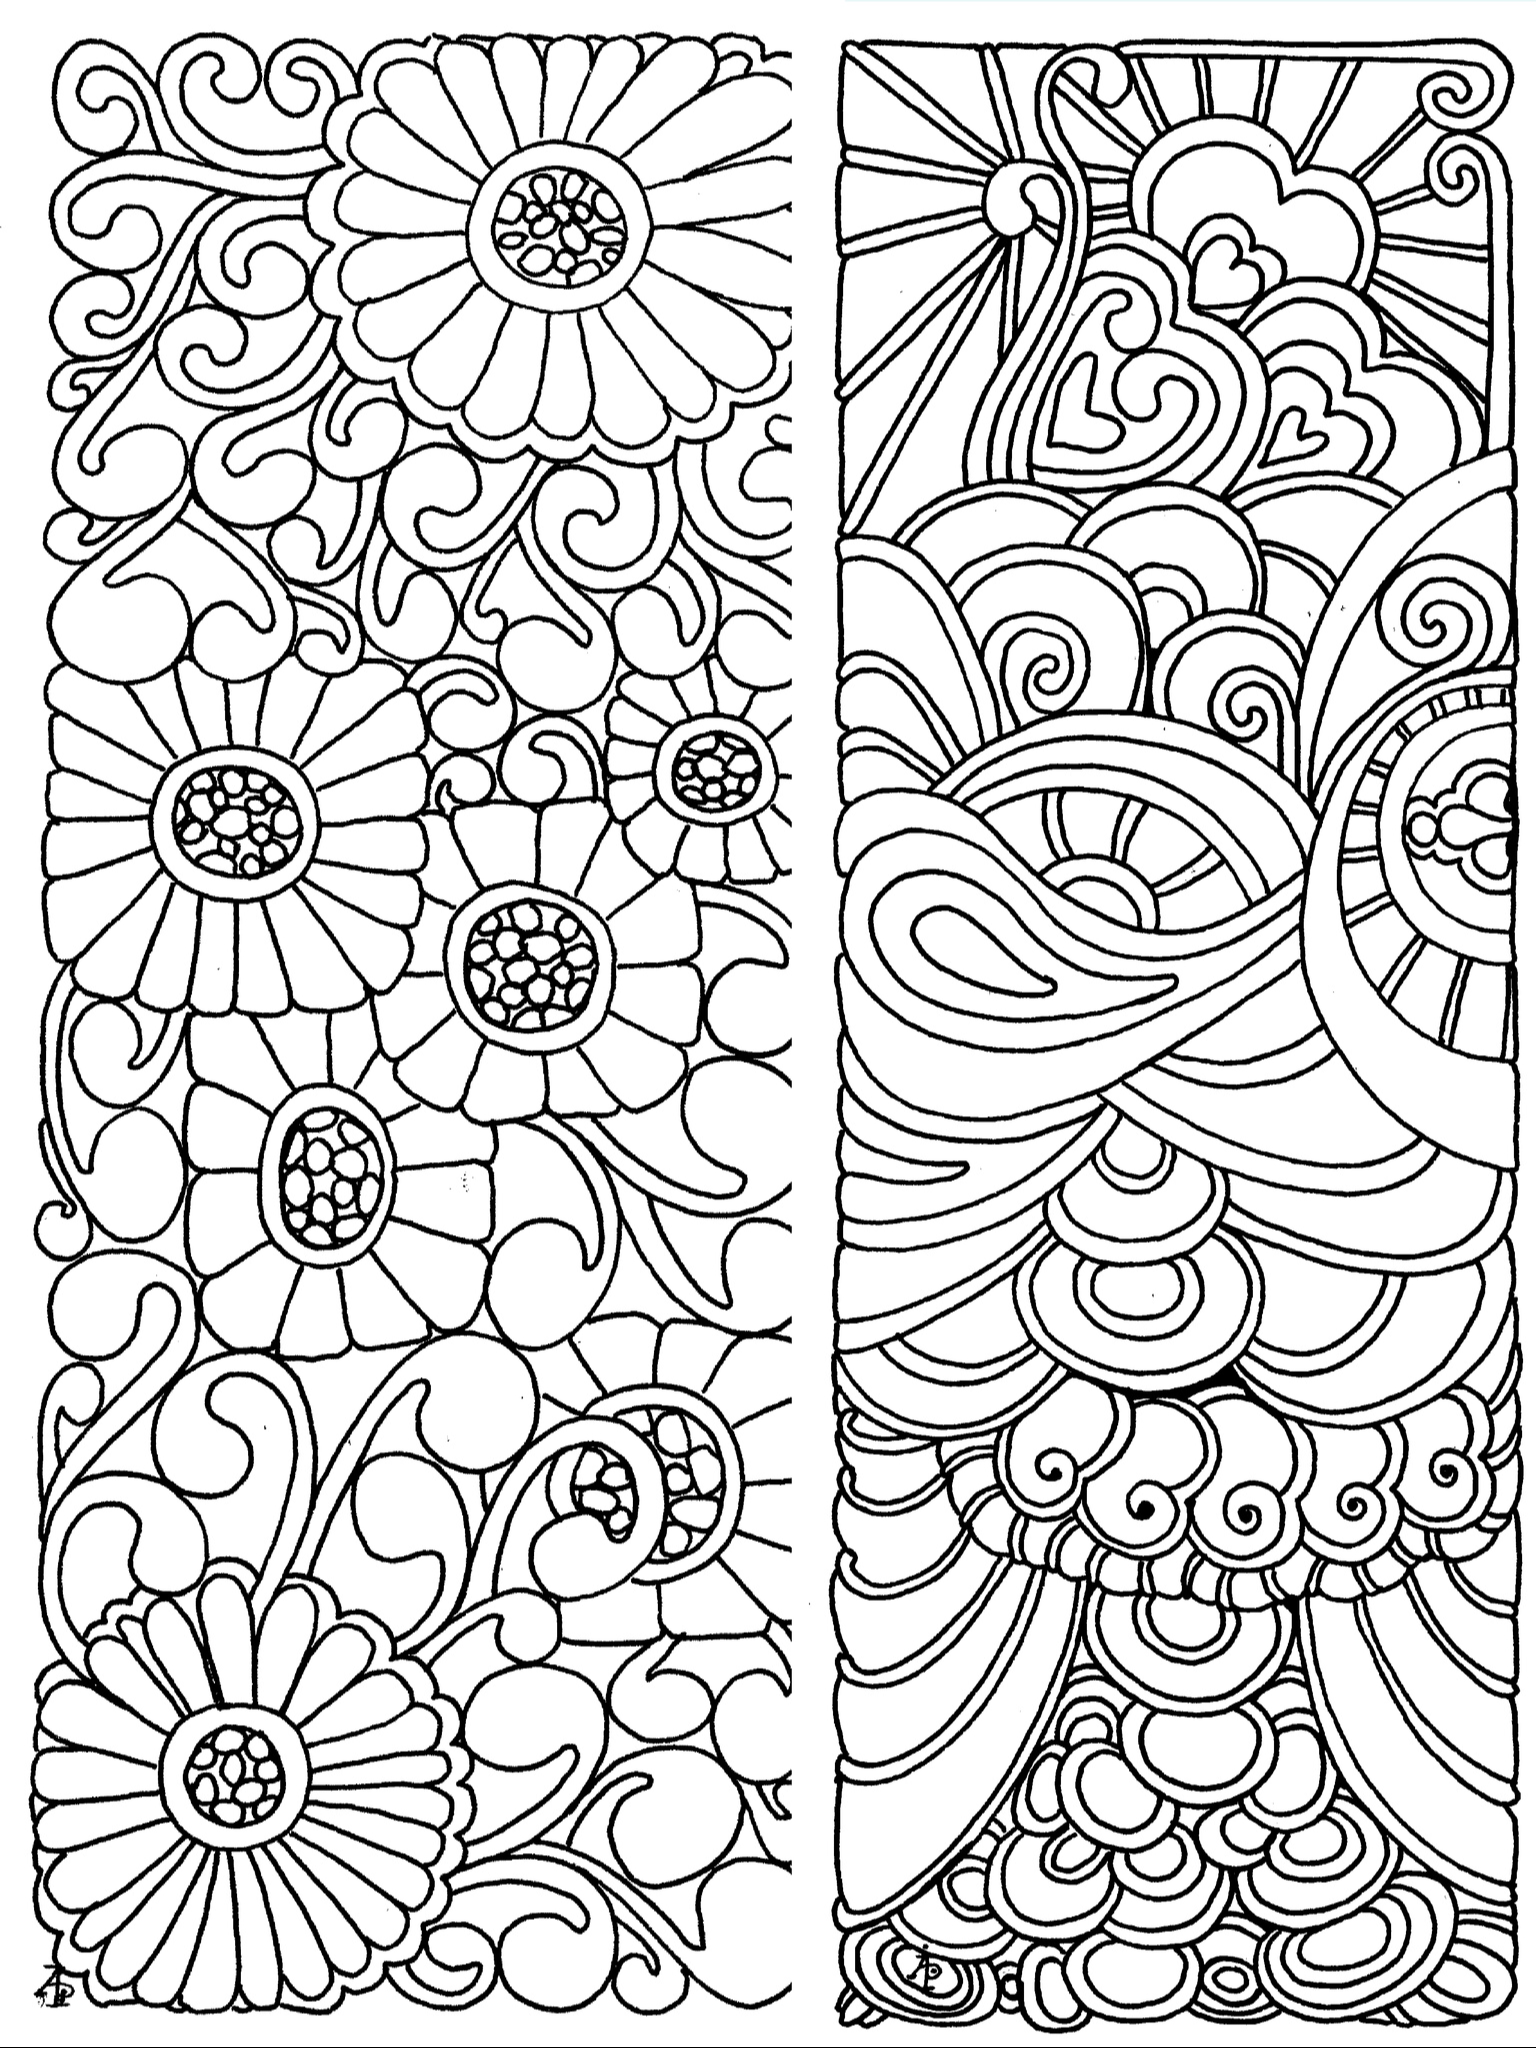 Bookmarks coloring page | Coloring bookmarks, Coloring pages, Bookmarks  printable